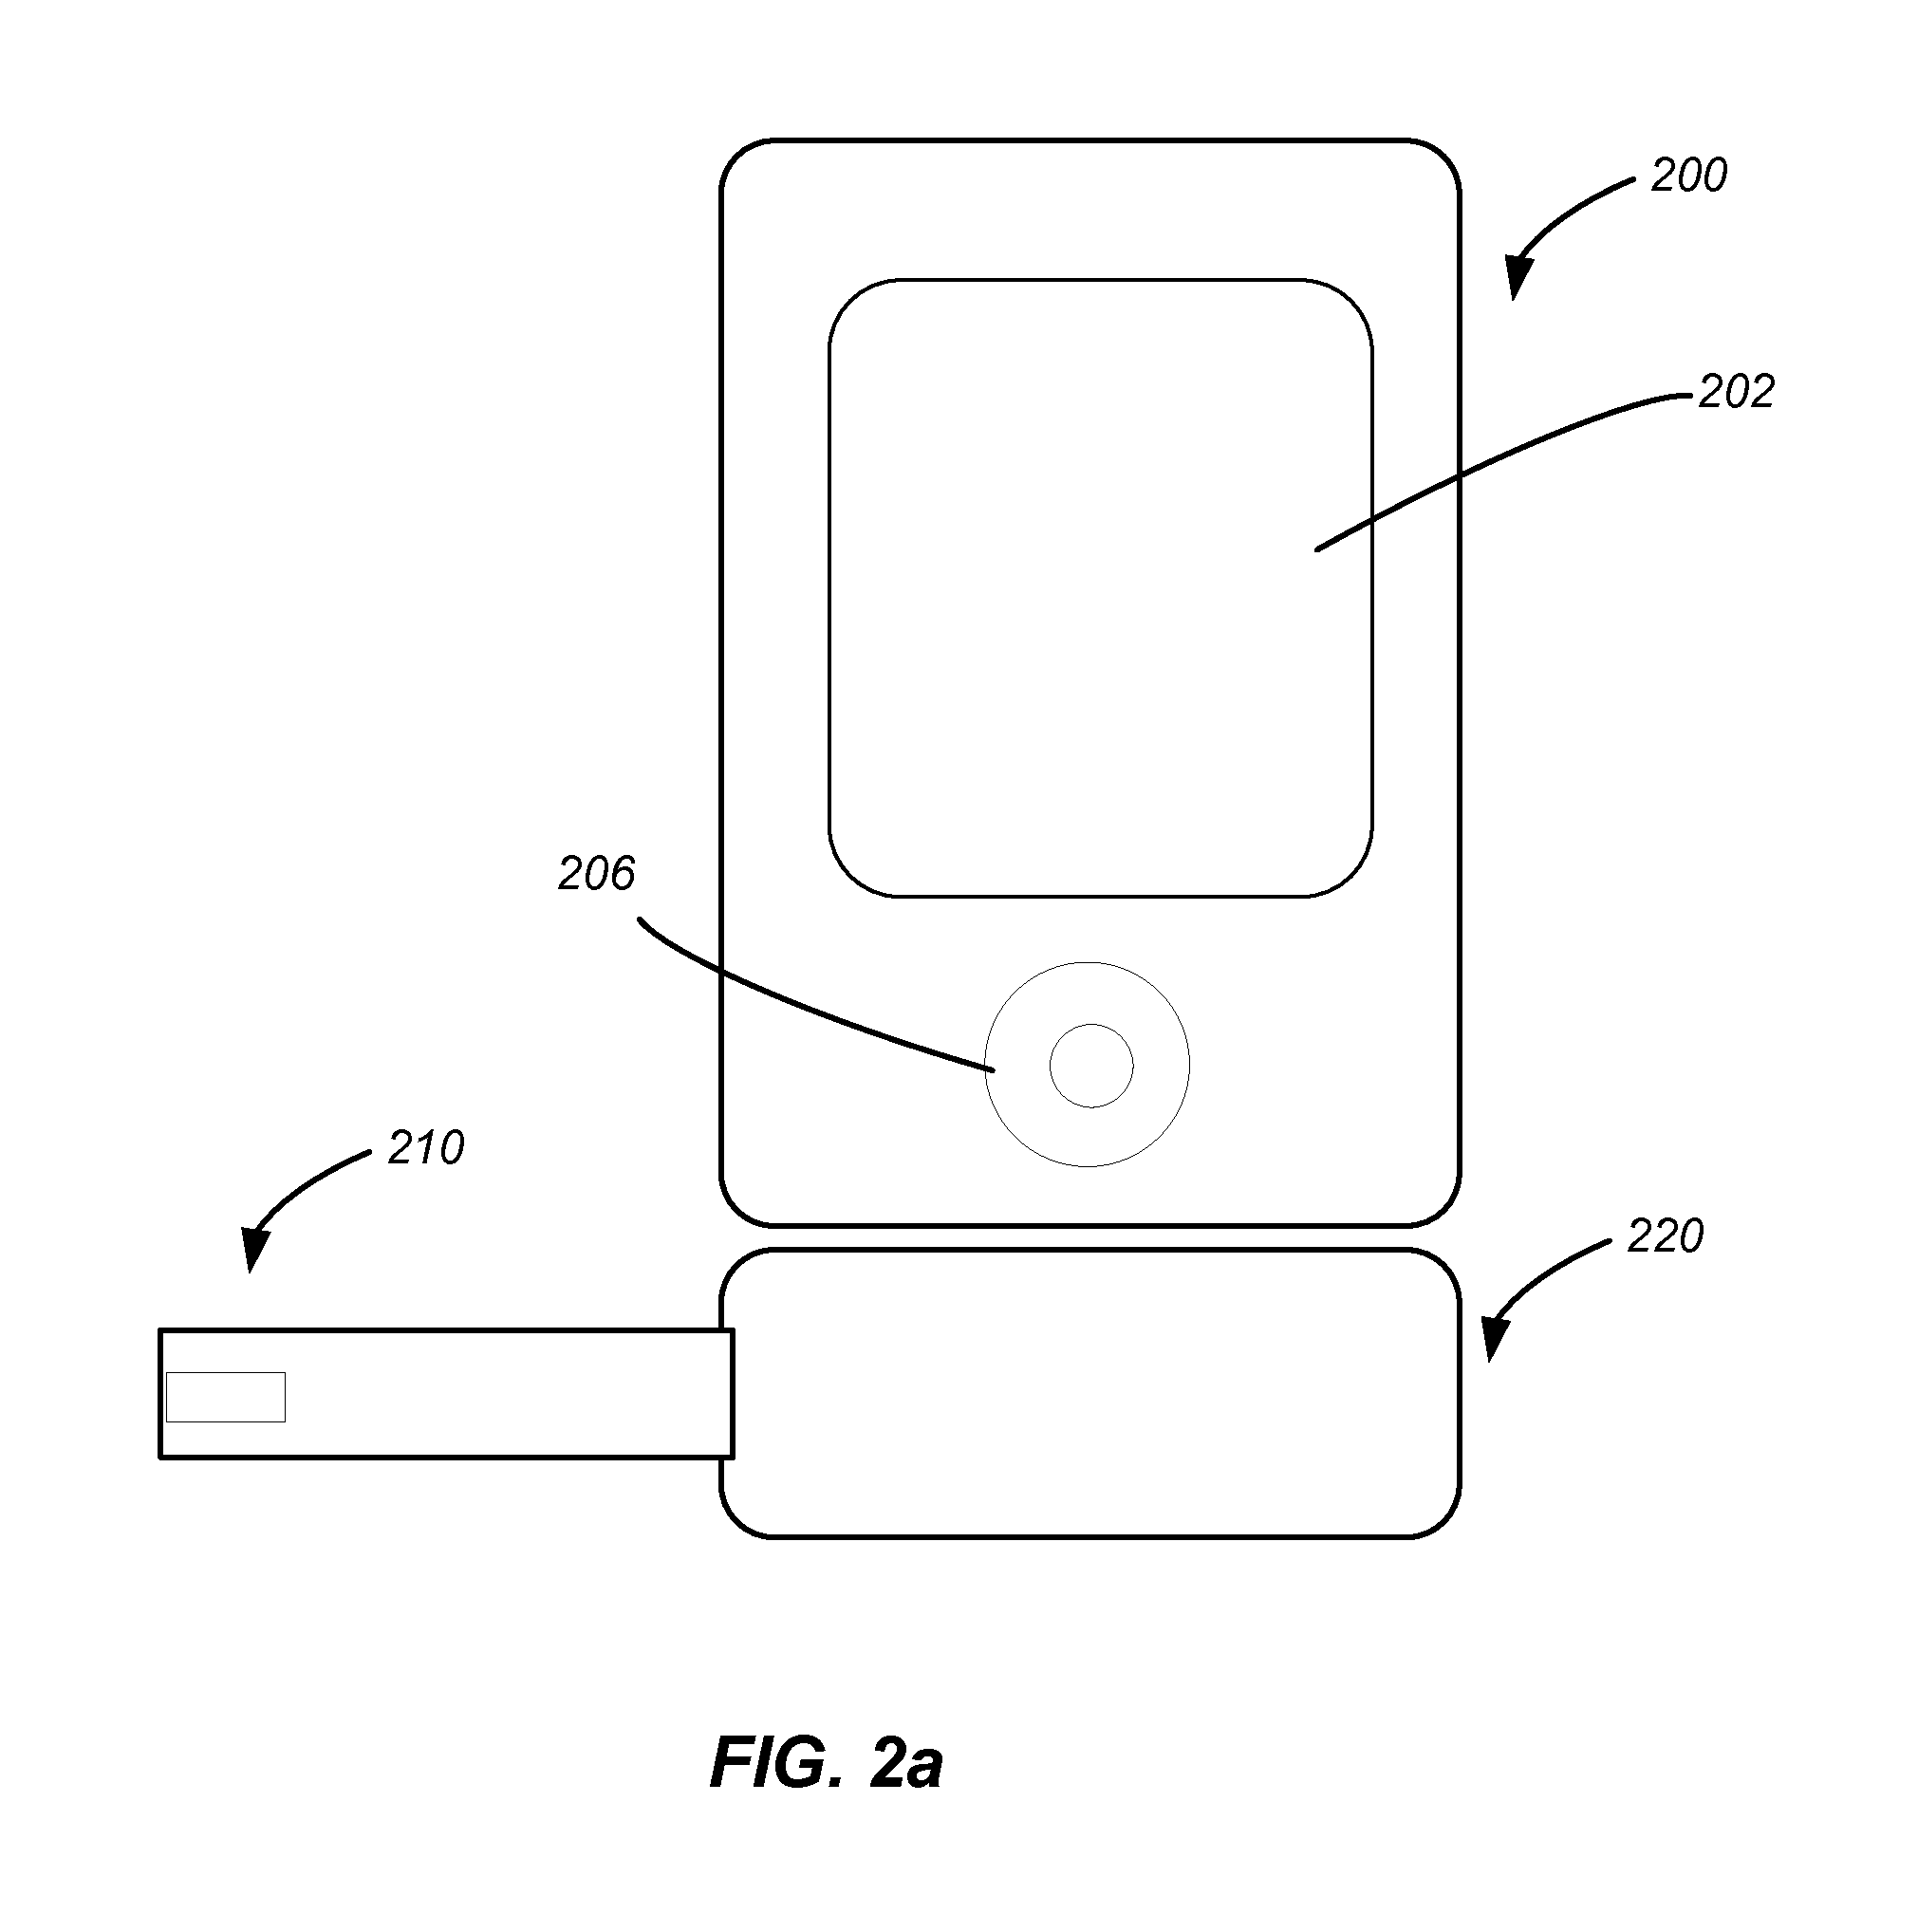 Glucose meter adaptable for use with handheld devices, and associated communication network